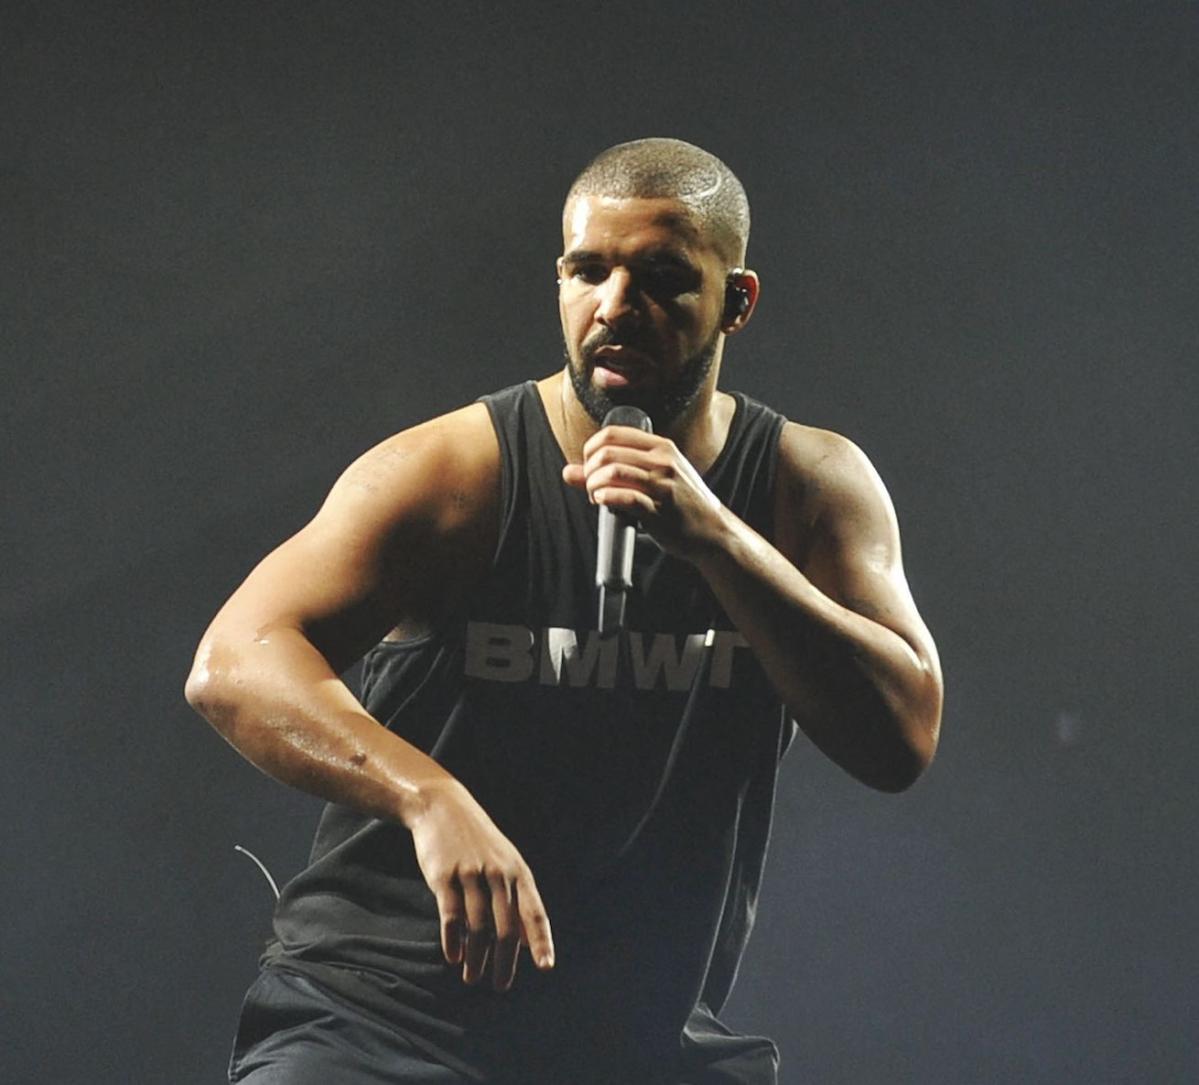 Drake Fan Who Threw 36G Bra on Stage Gets Offer to Work for